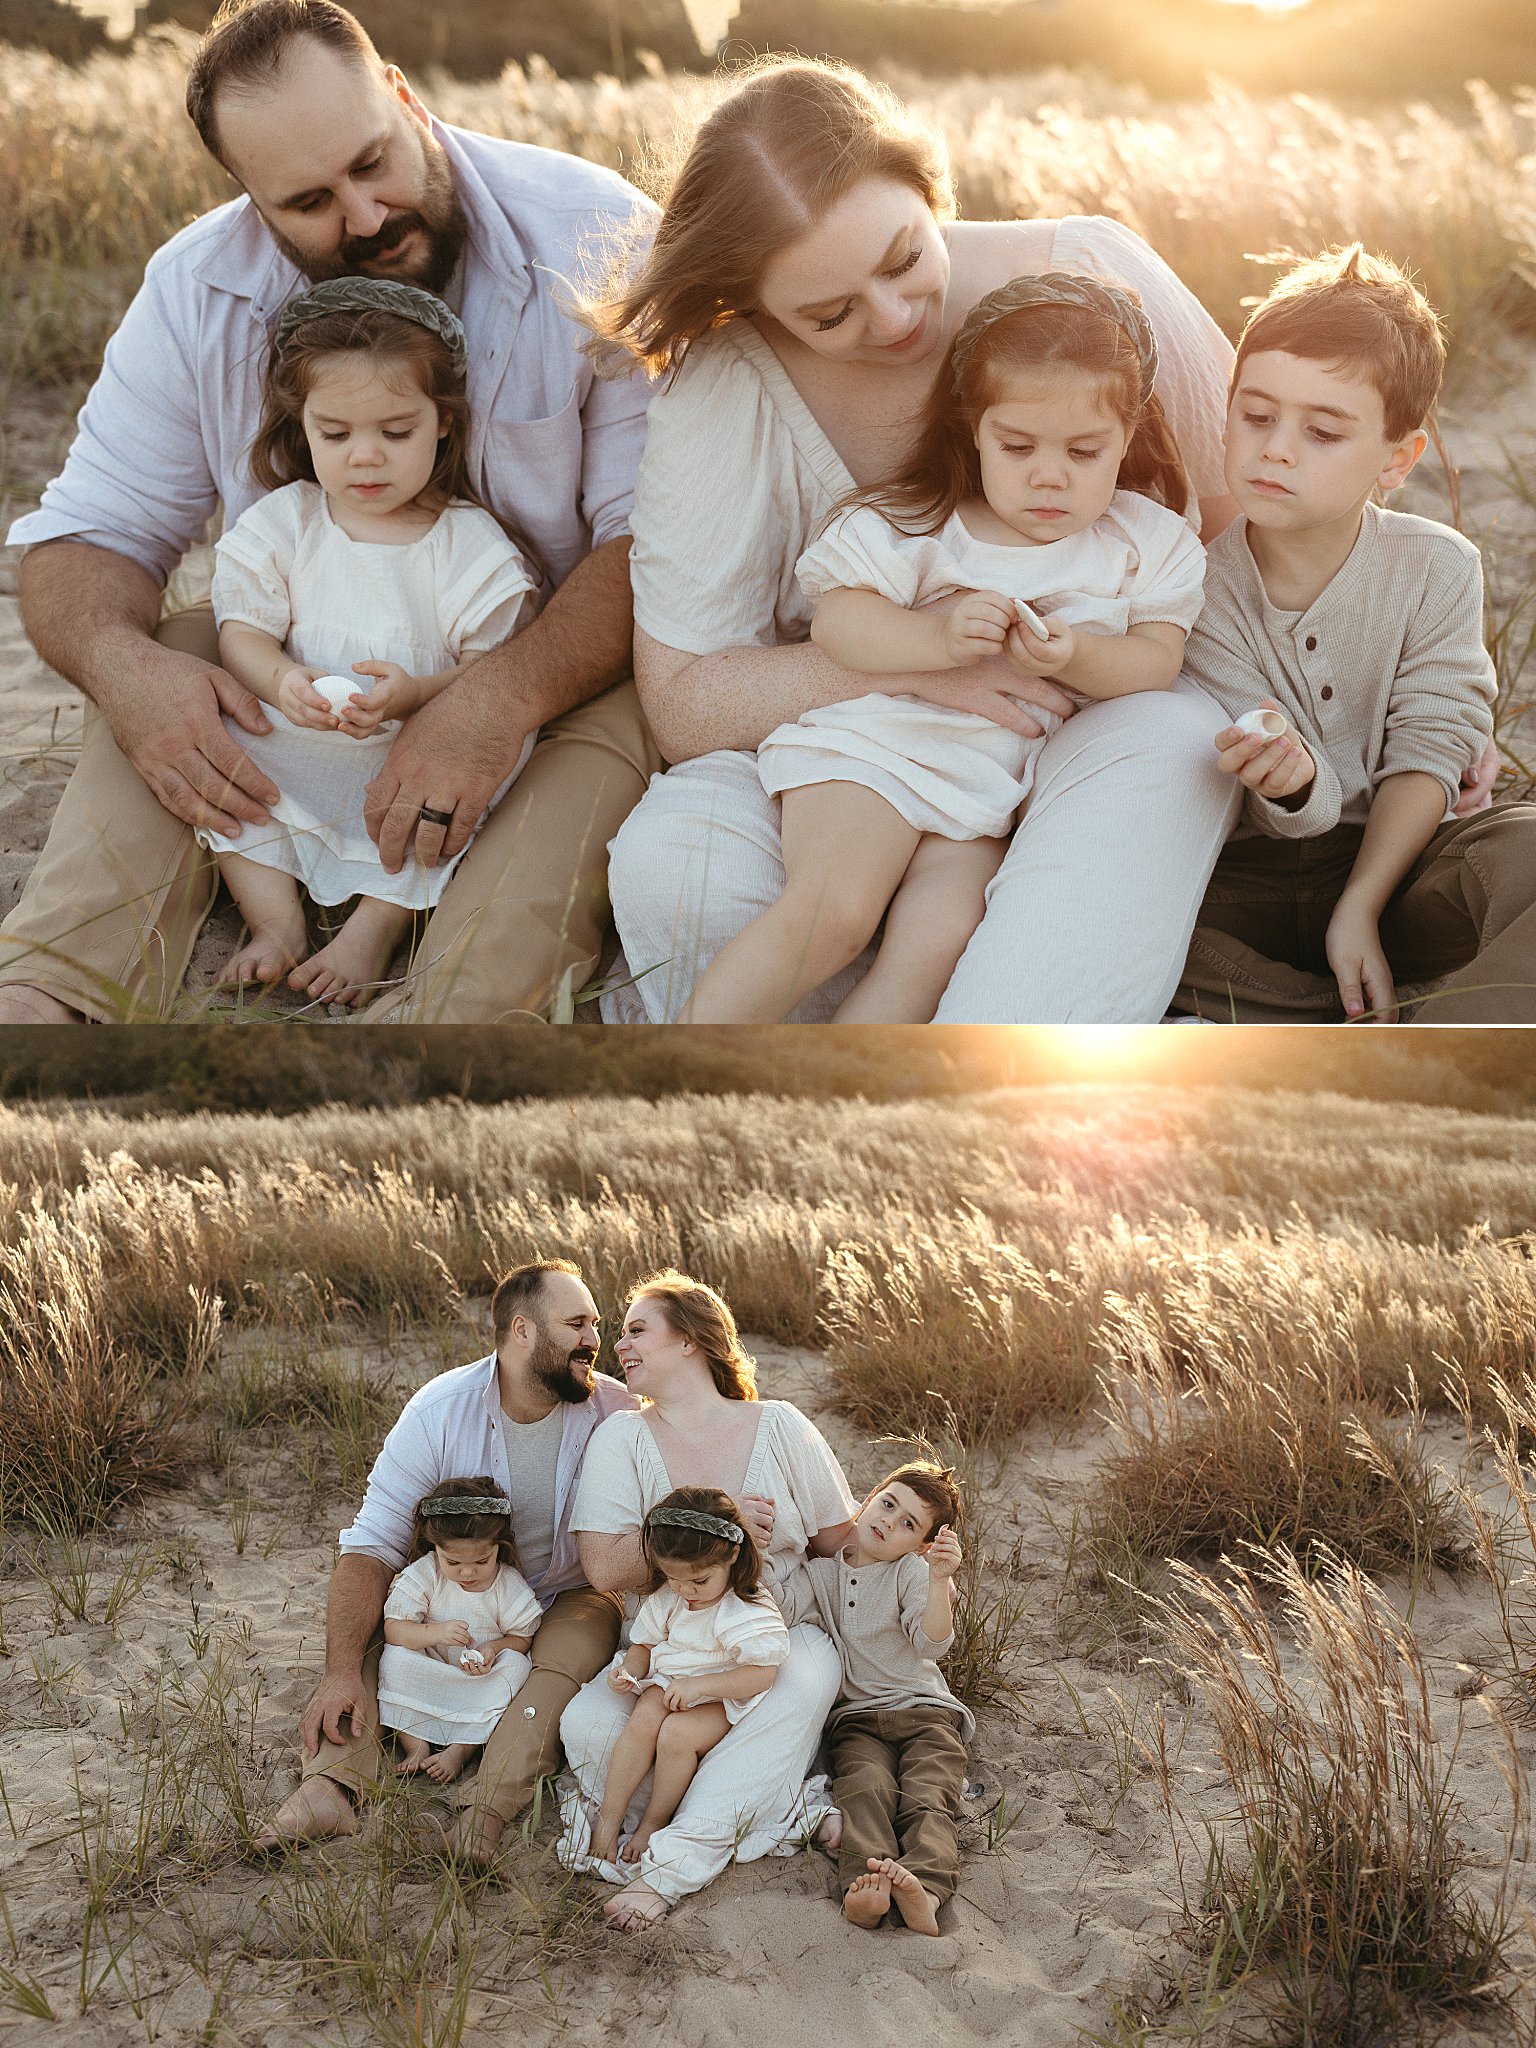 man and woman lean close as they hold children by Virginia Beach photographer